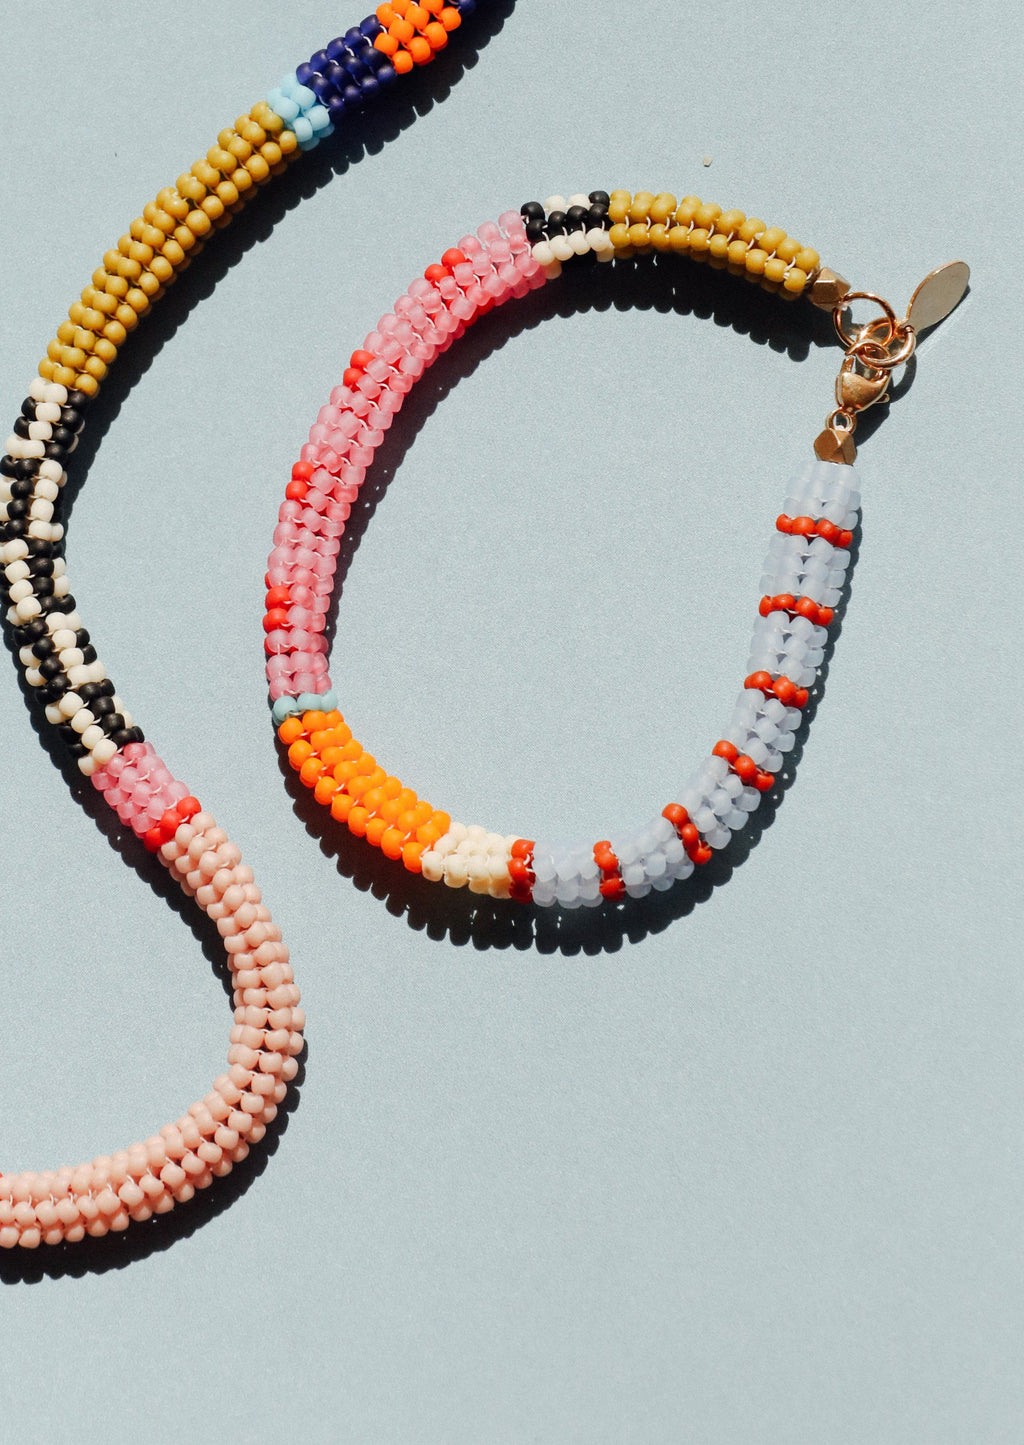 Cuerda One of A Kind Beaded Bracelet | Vegan, Ethically Made & Sustainable | Glass Beads (Multi) by Kisiwa